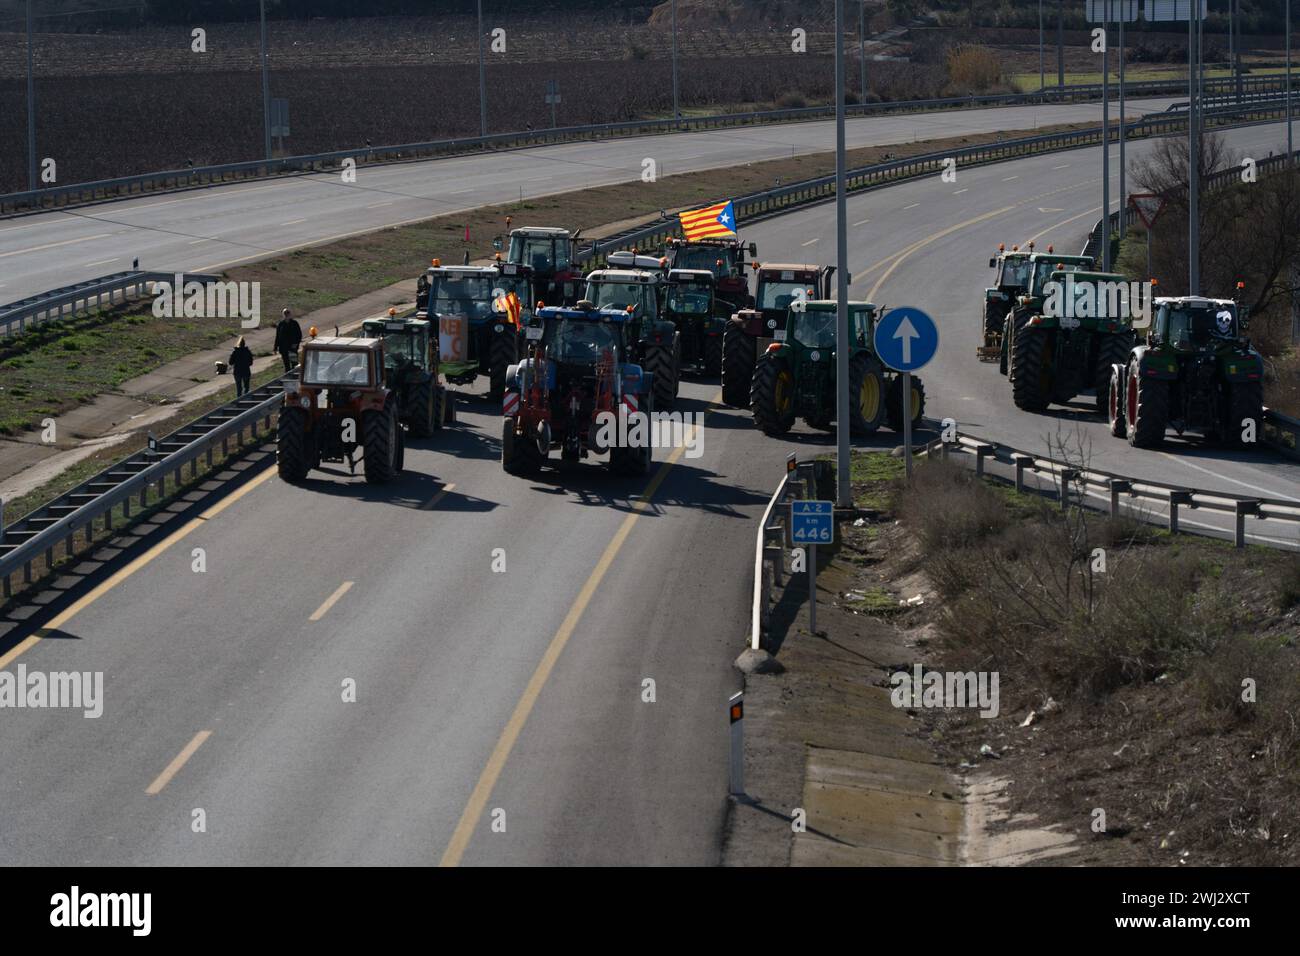 February, 12, 2024 Soses, Spainpol New protest by Catalan farmers, this time blocking the entry to Catalonia from Aragon at ap-2, in Soses. Tension with the police has been escalating as the blockade was not authorized. The Mossos d'Esquadra (Catalan police) have deployed riot vans and helicopters. They demand that their demands be heard and that the pressure does not decrease. They are also preparing blockades at the port of Tarragona and at the wholesale market in Barcelona. Nueva protesta de los agricultores catalanes, esta vez bloqueando la entrada a Catalu&#xf1;a desde Aragón, en Sos Stock Photo